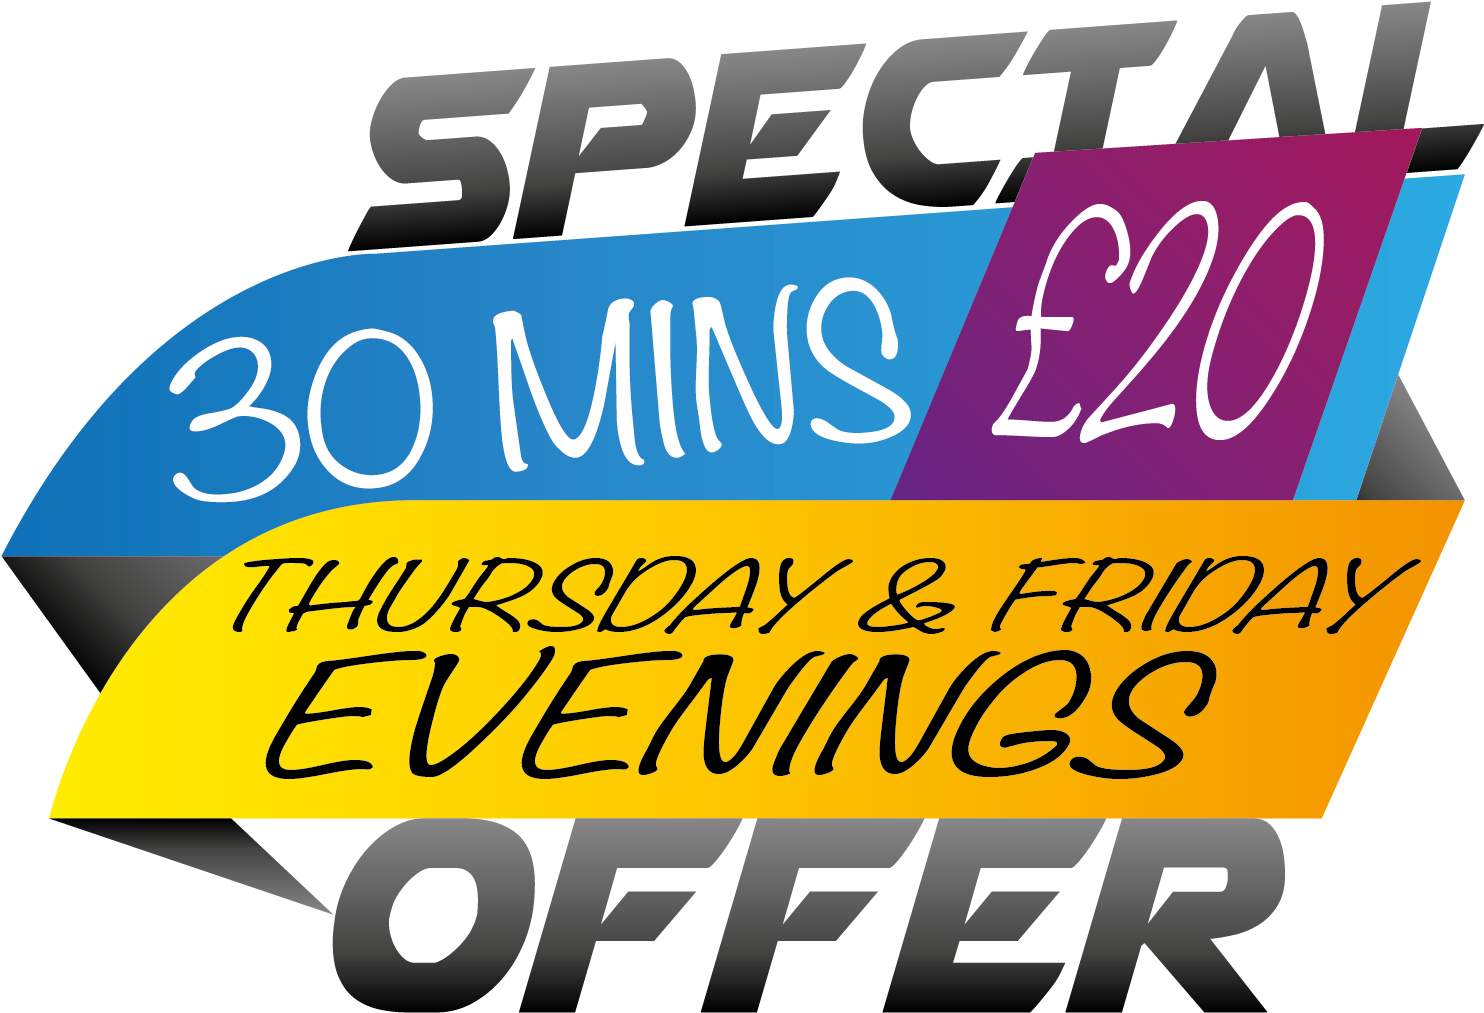 Evening Special Offer30 Mins20 Pounds PNG image